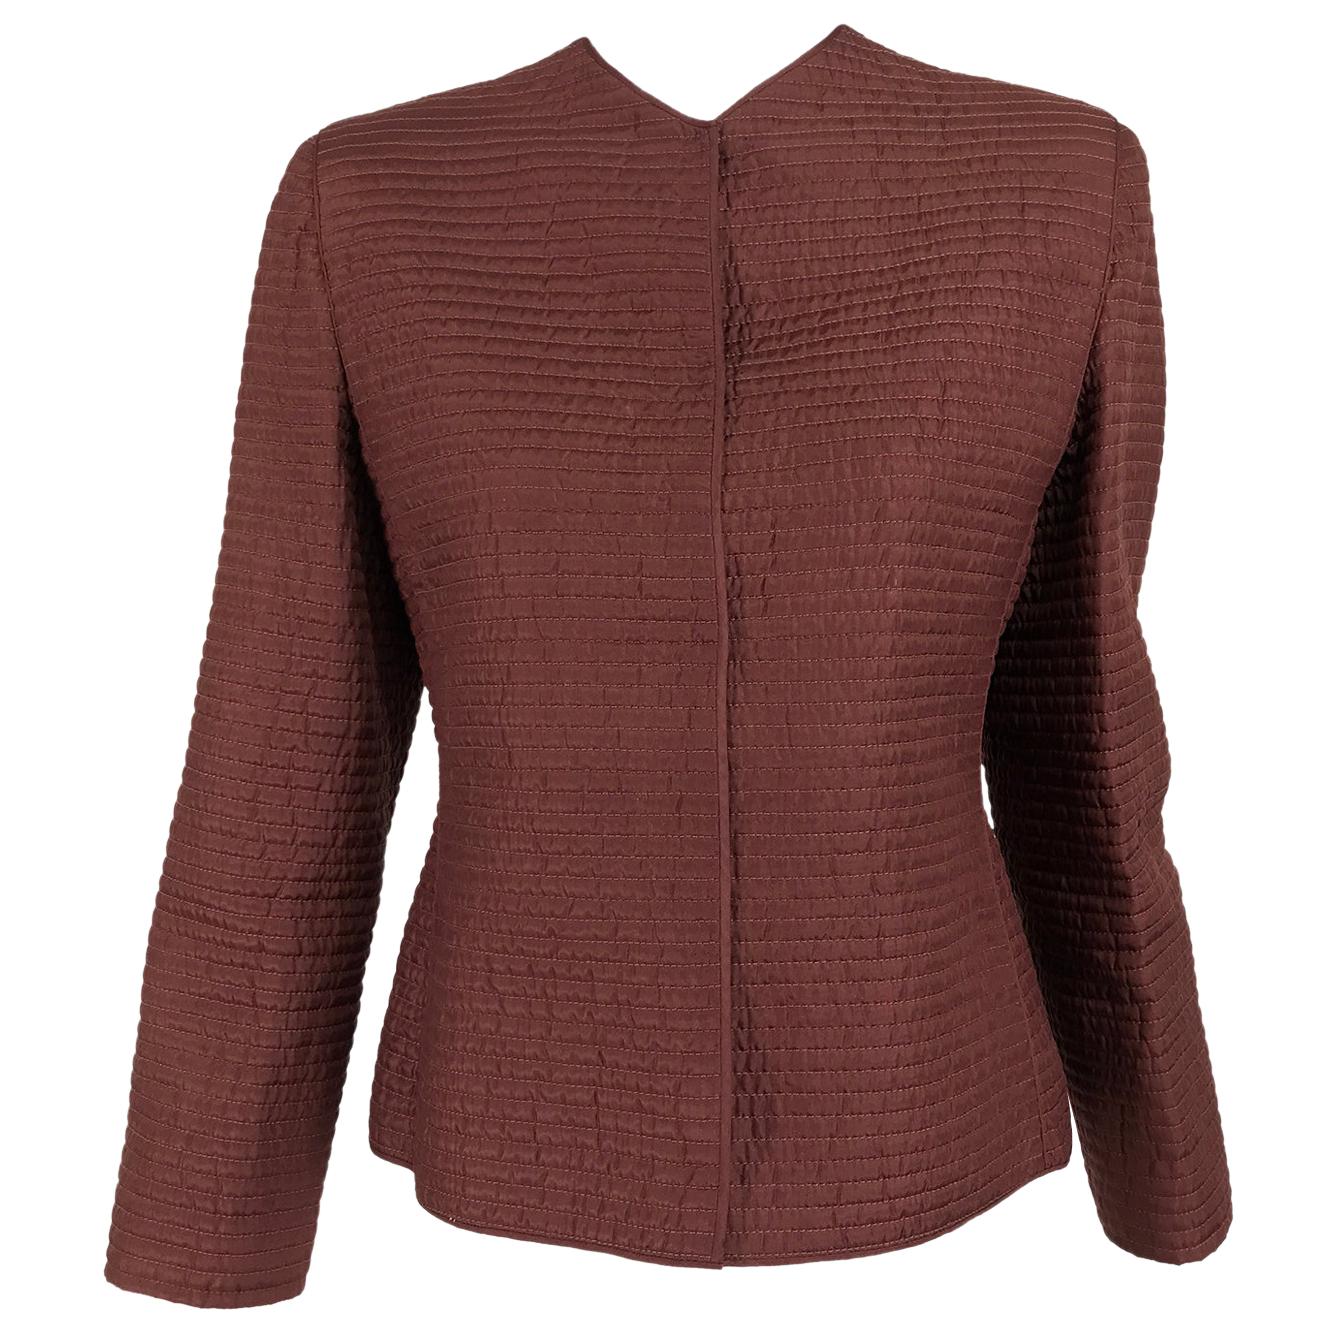 Mary McFadden Quilted Jacket in Rich Raisin Brown 1970s